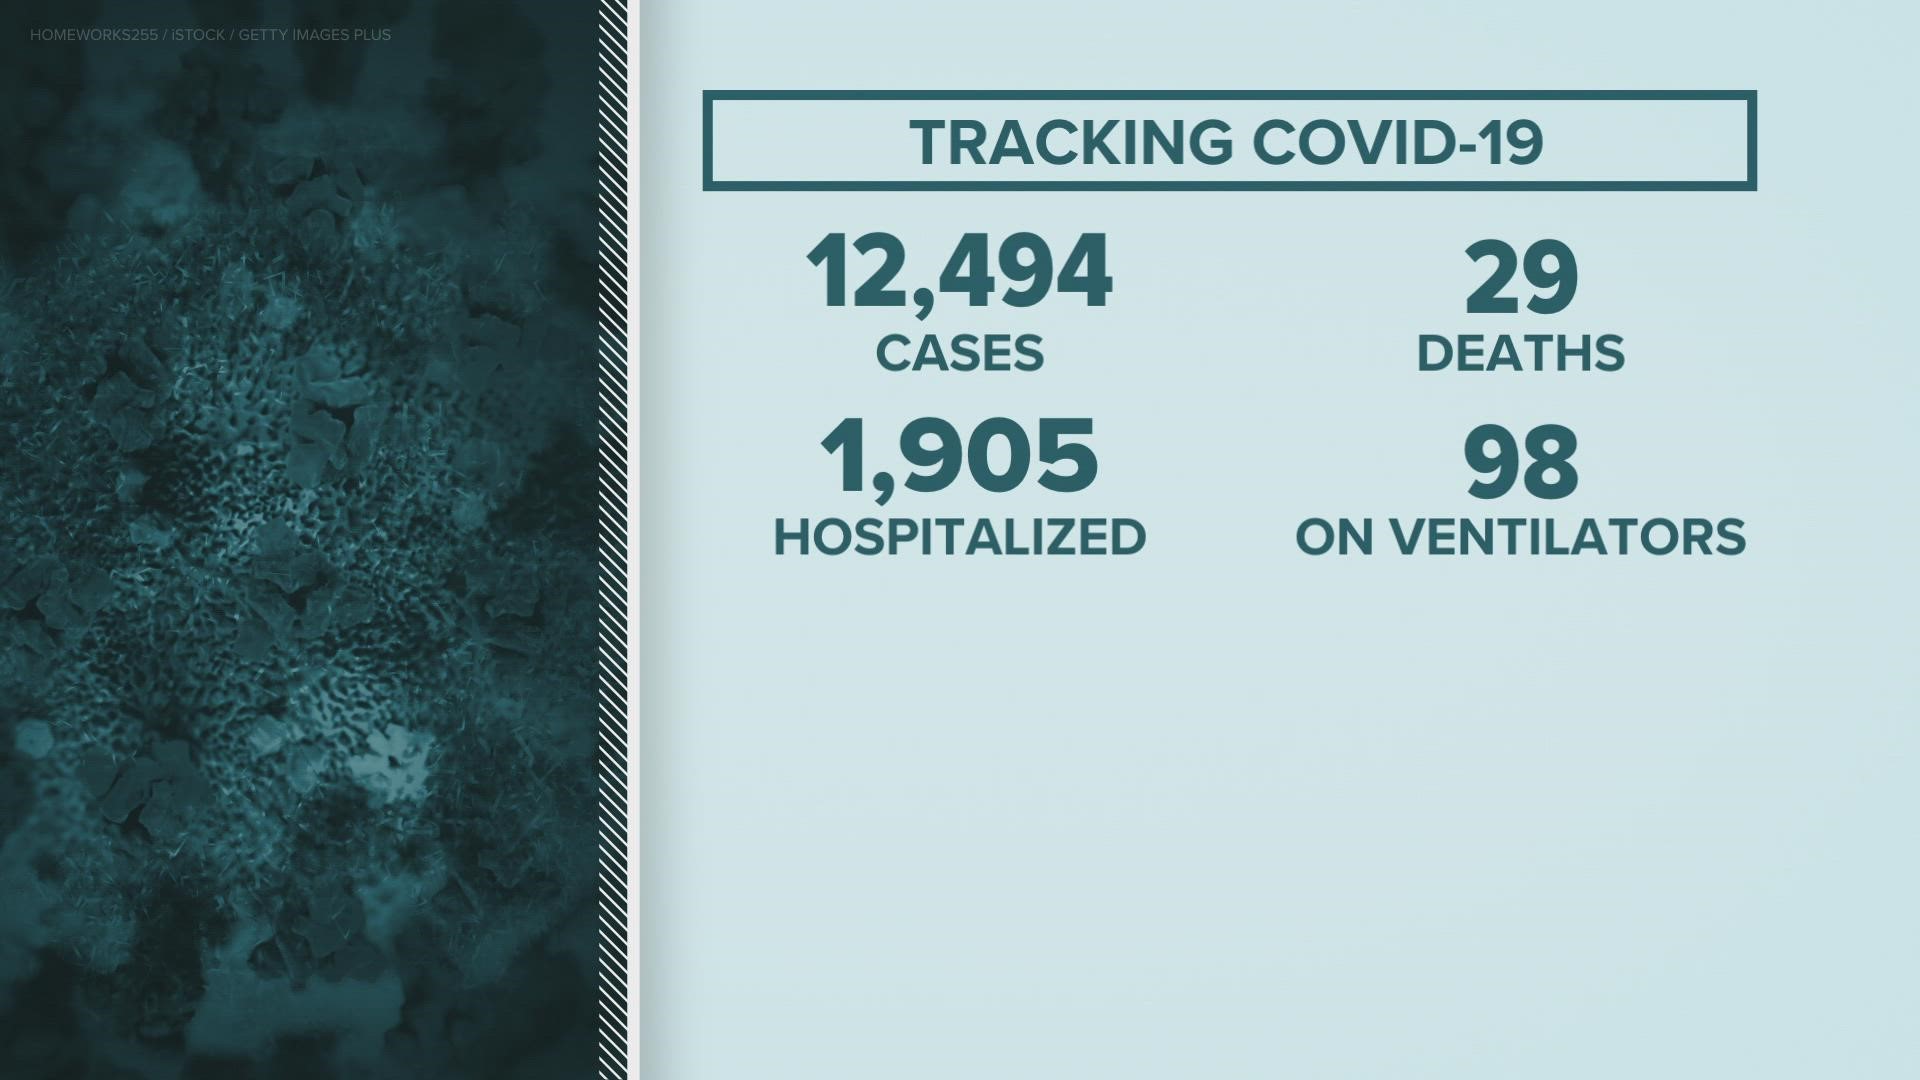 The state reported over 12,000 cases on Tuesday.